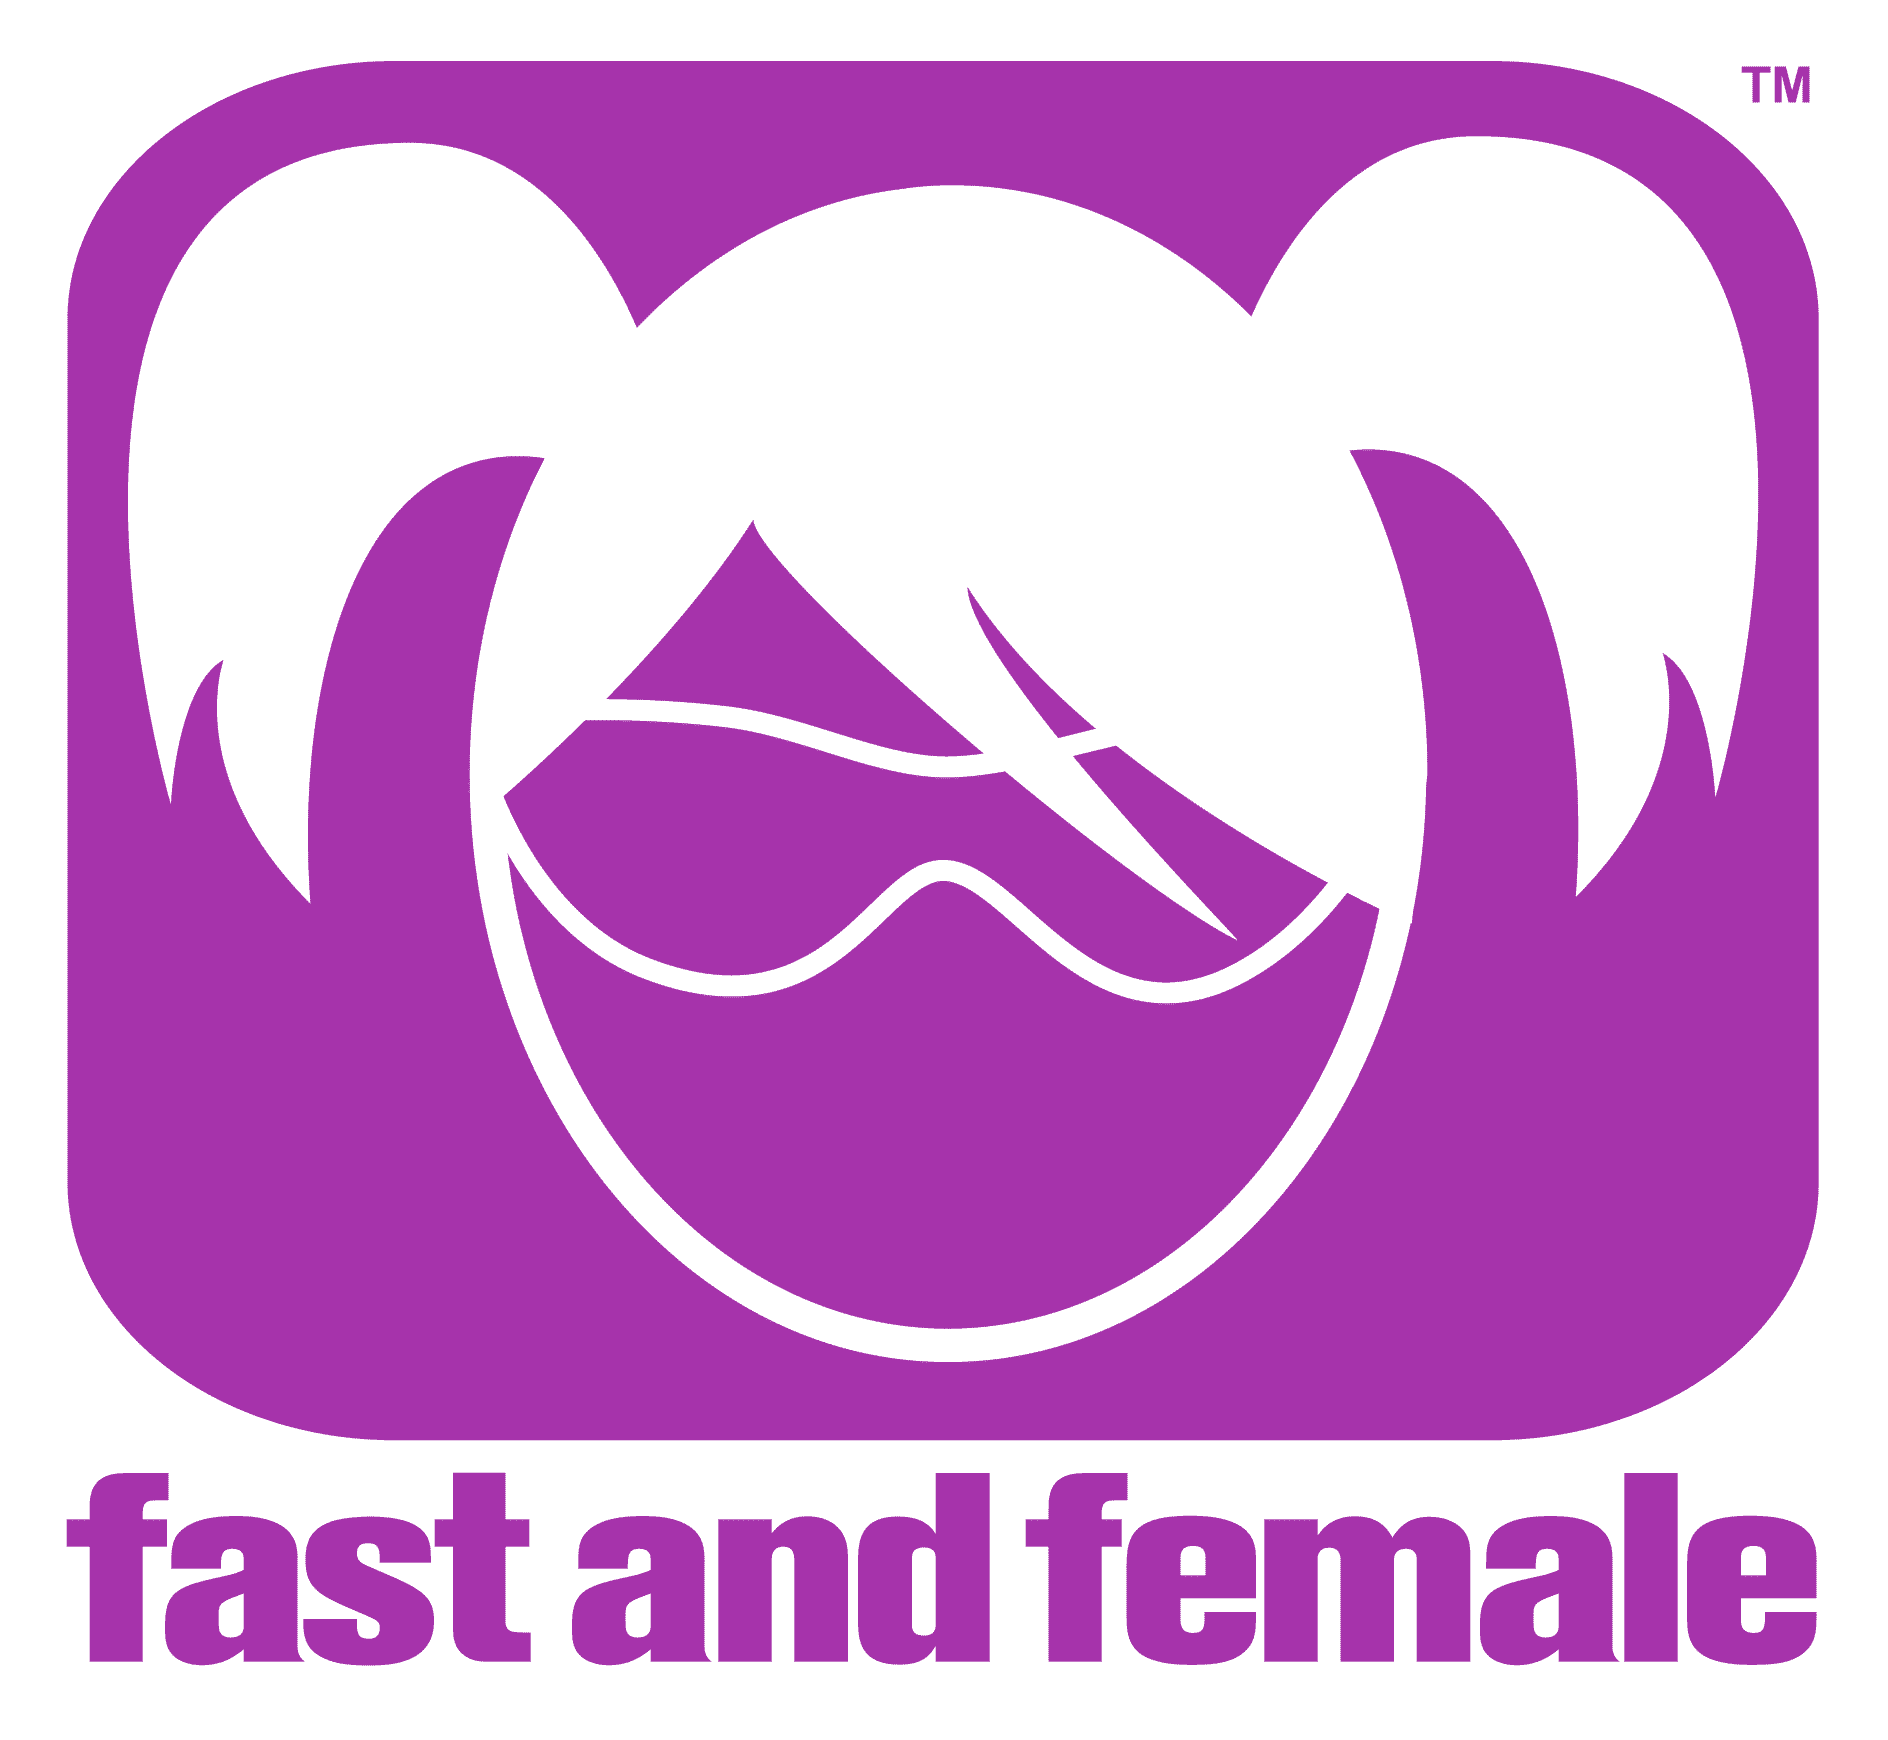 Fast and Female